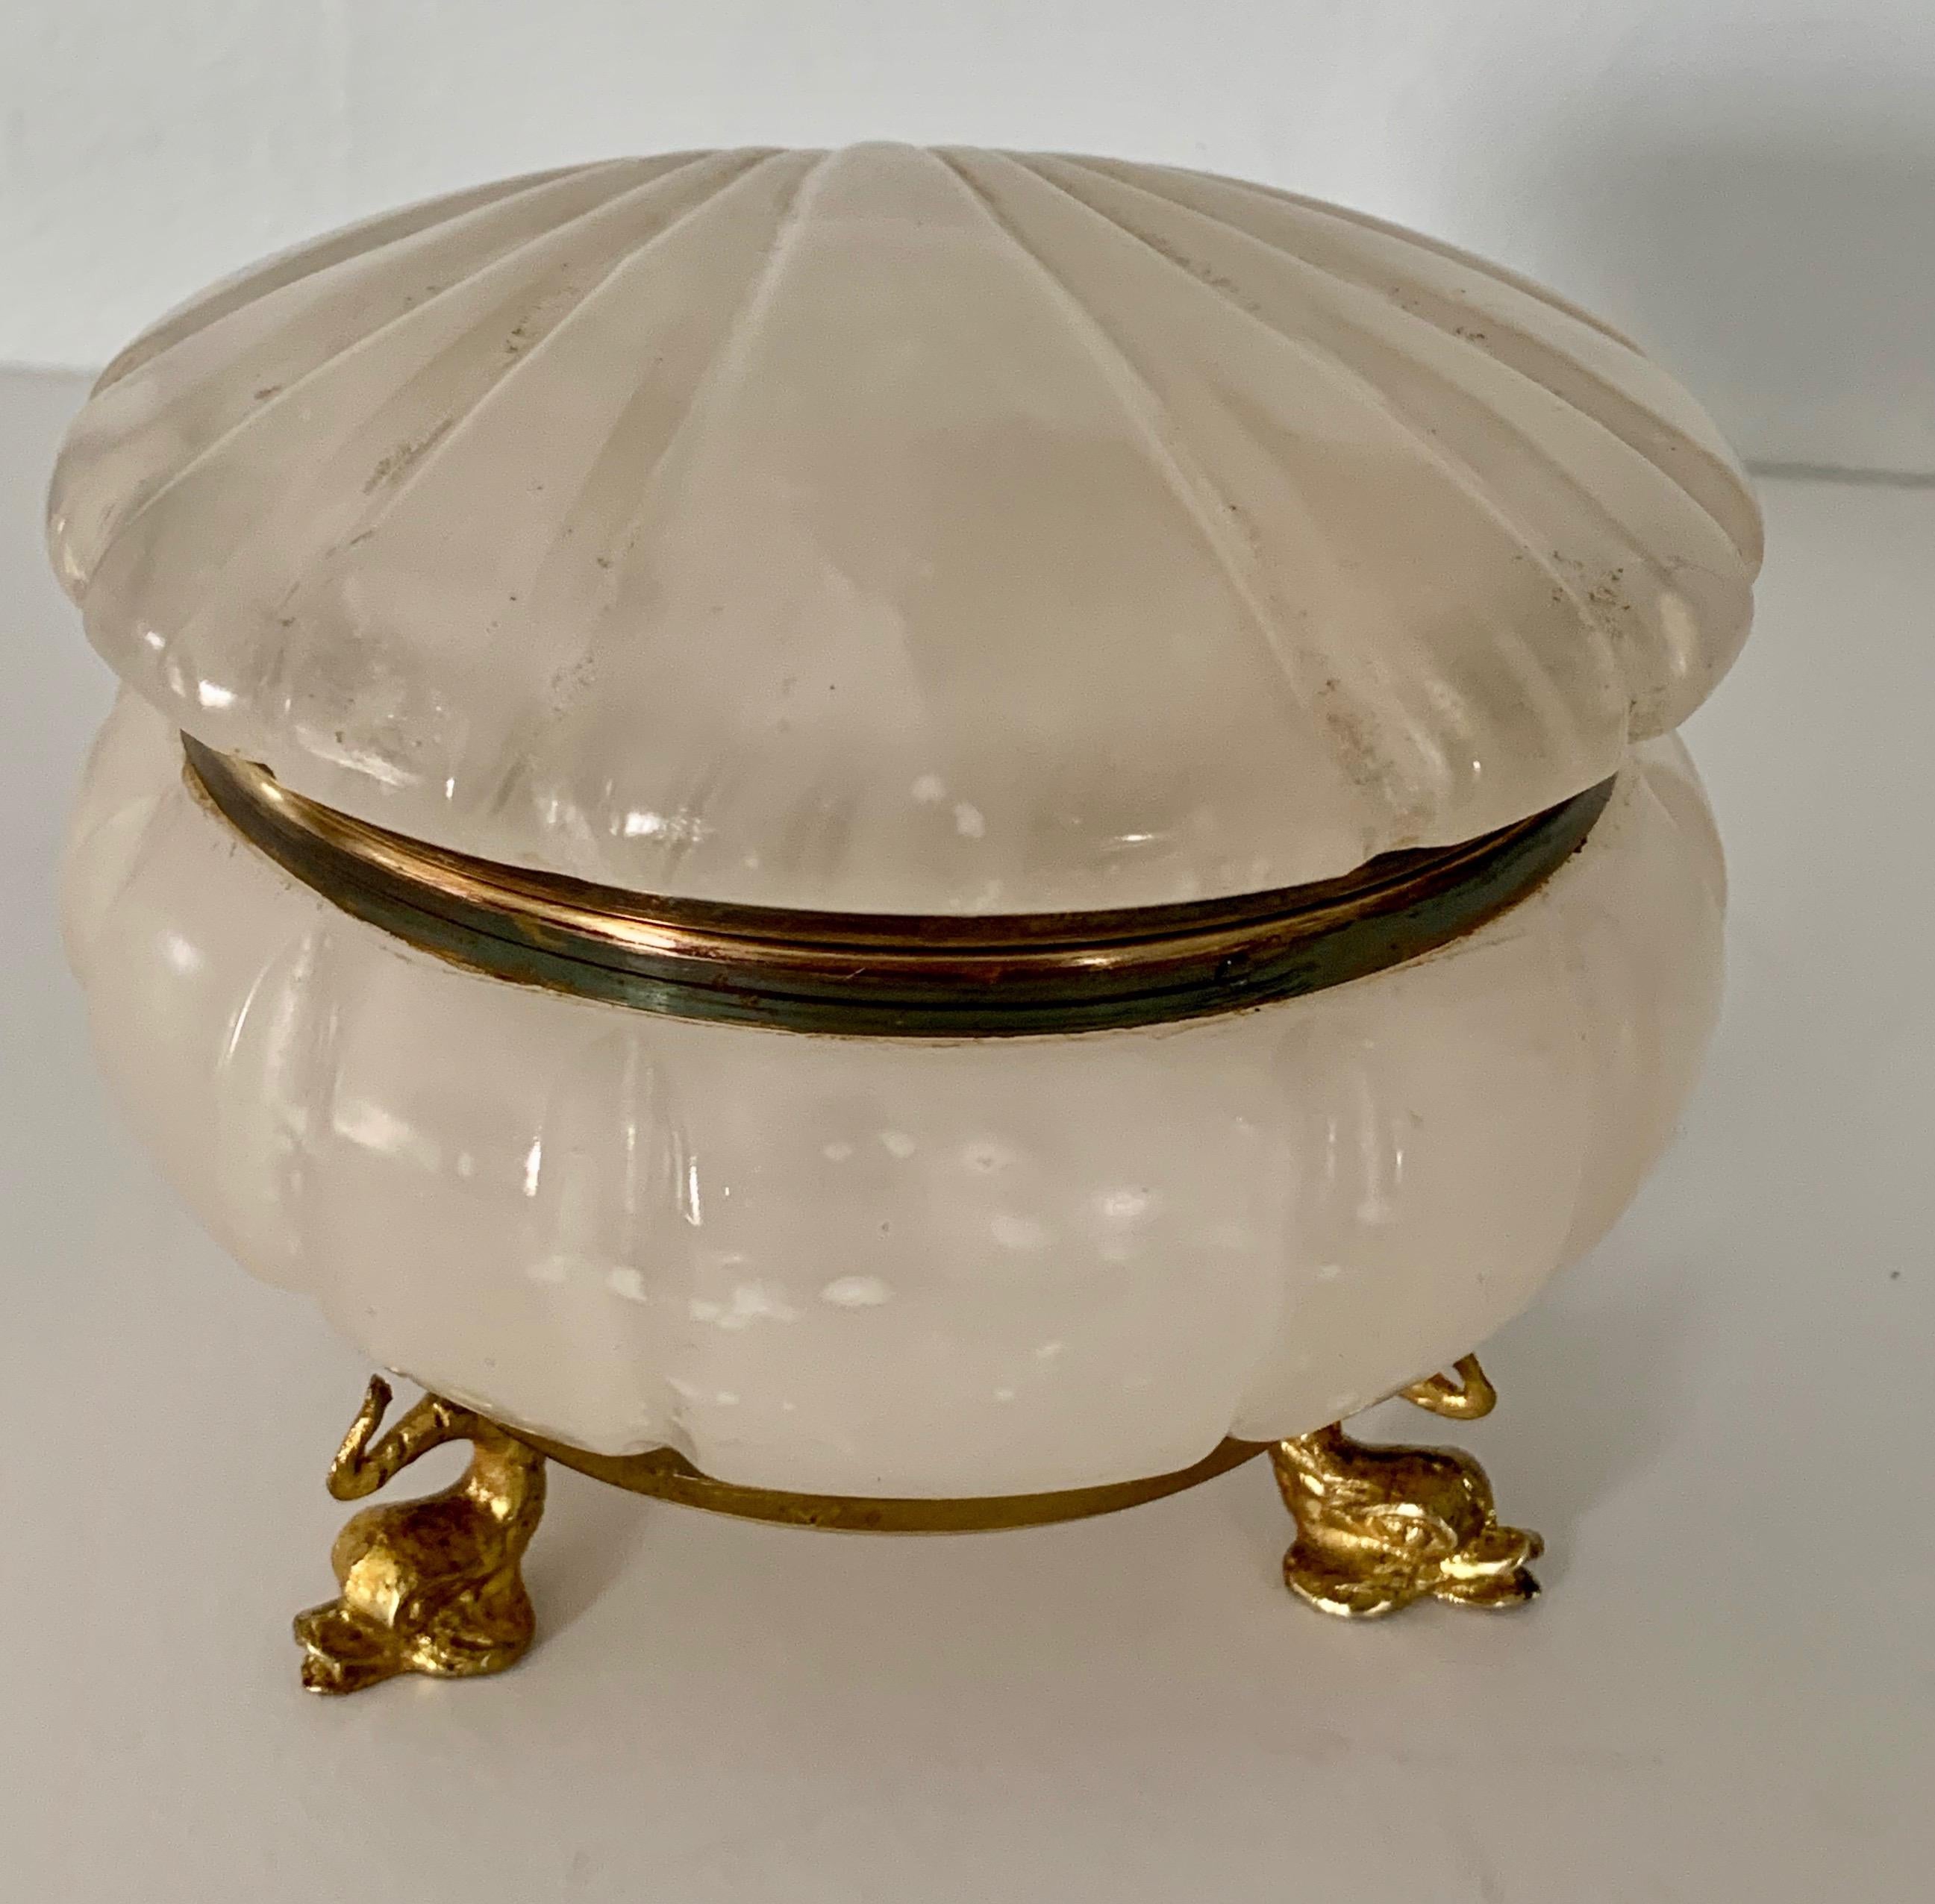 Lidded Alabaster shell box with dolphin feet - compliment to the vanity or dressing table... holding change, jewelry, or make-up accessories. The gold dolphin feet are a wonderful detail on this piece.